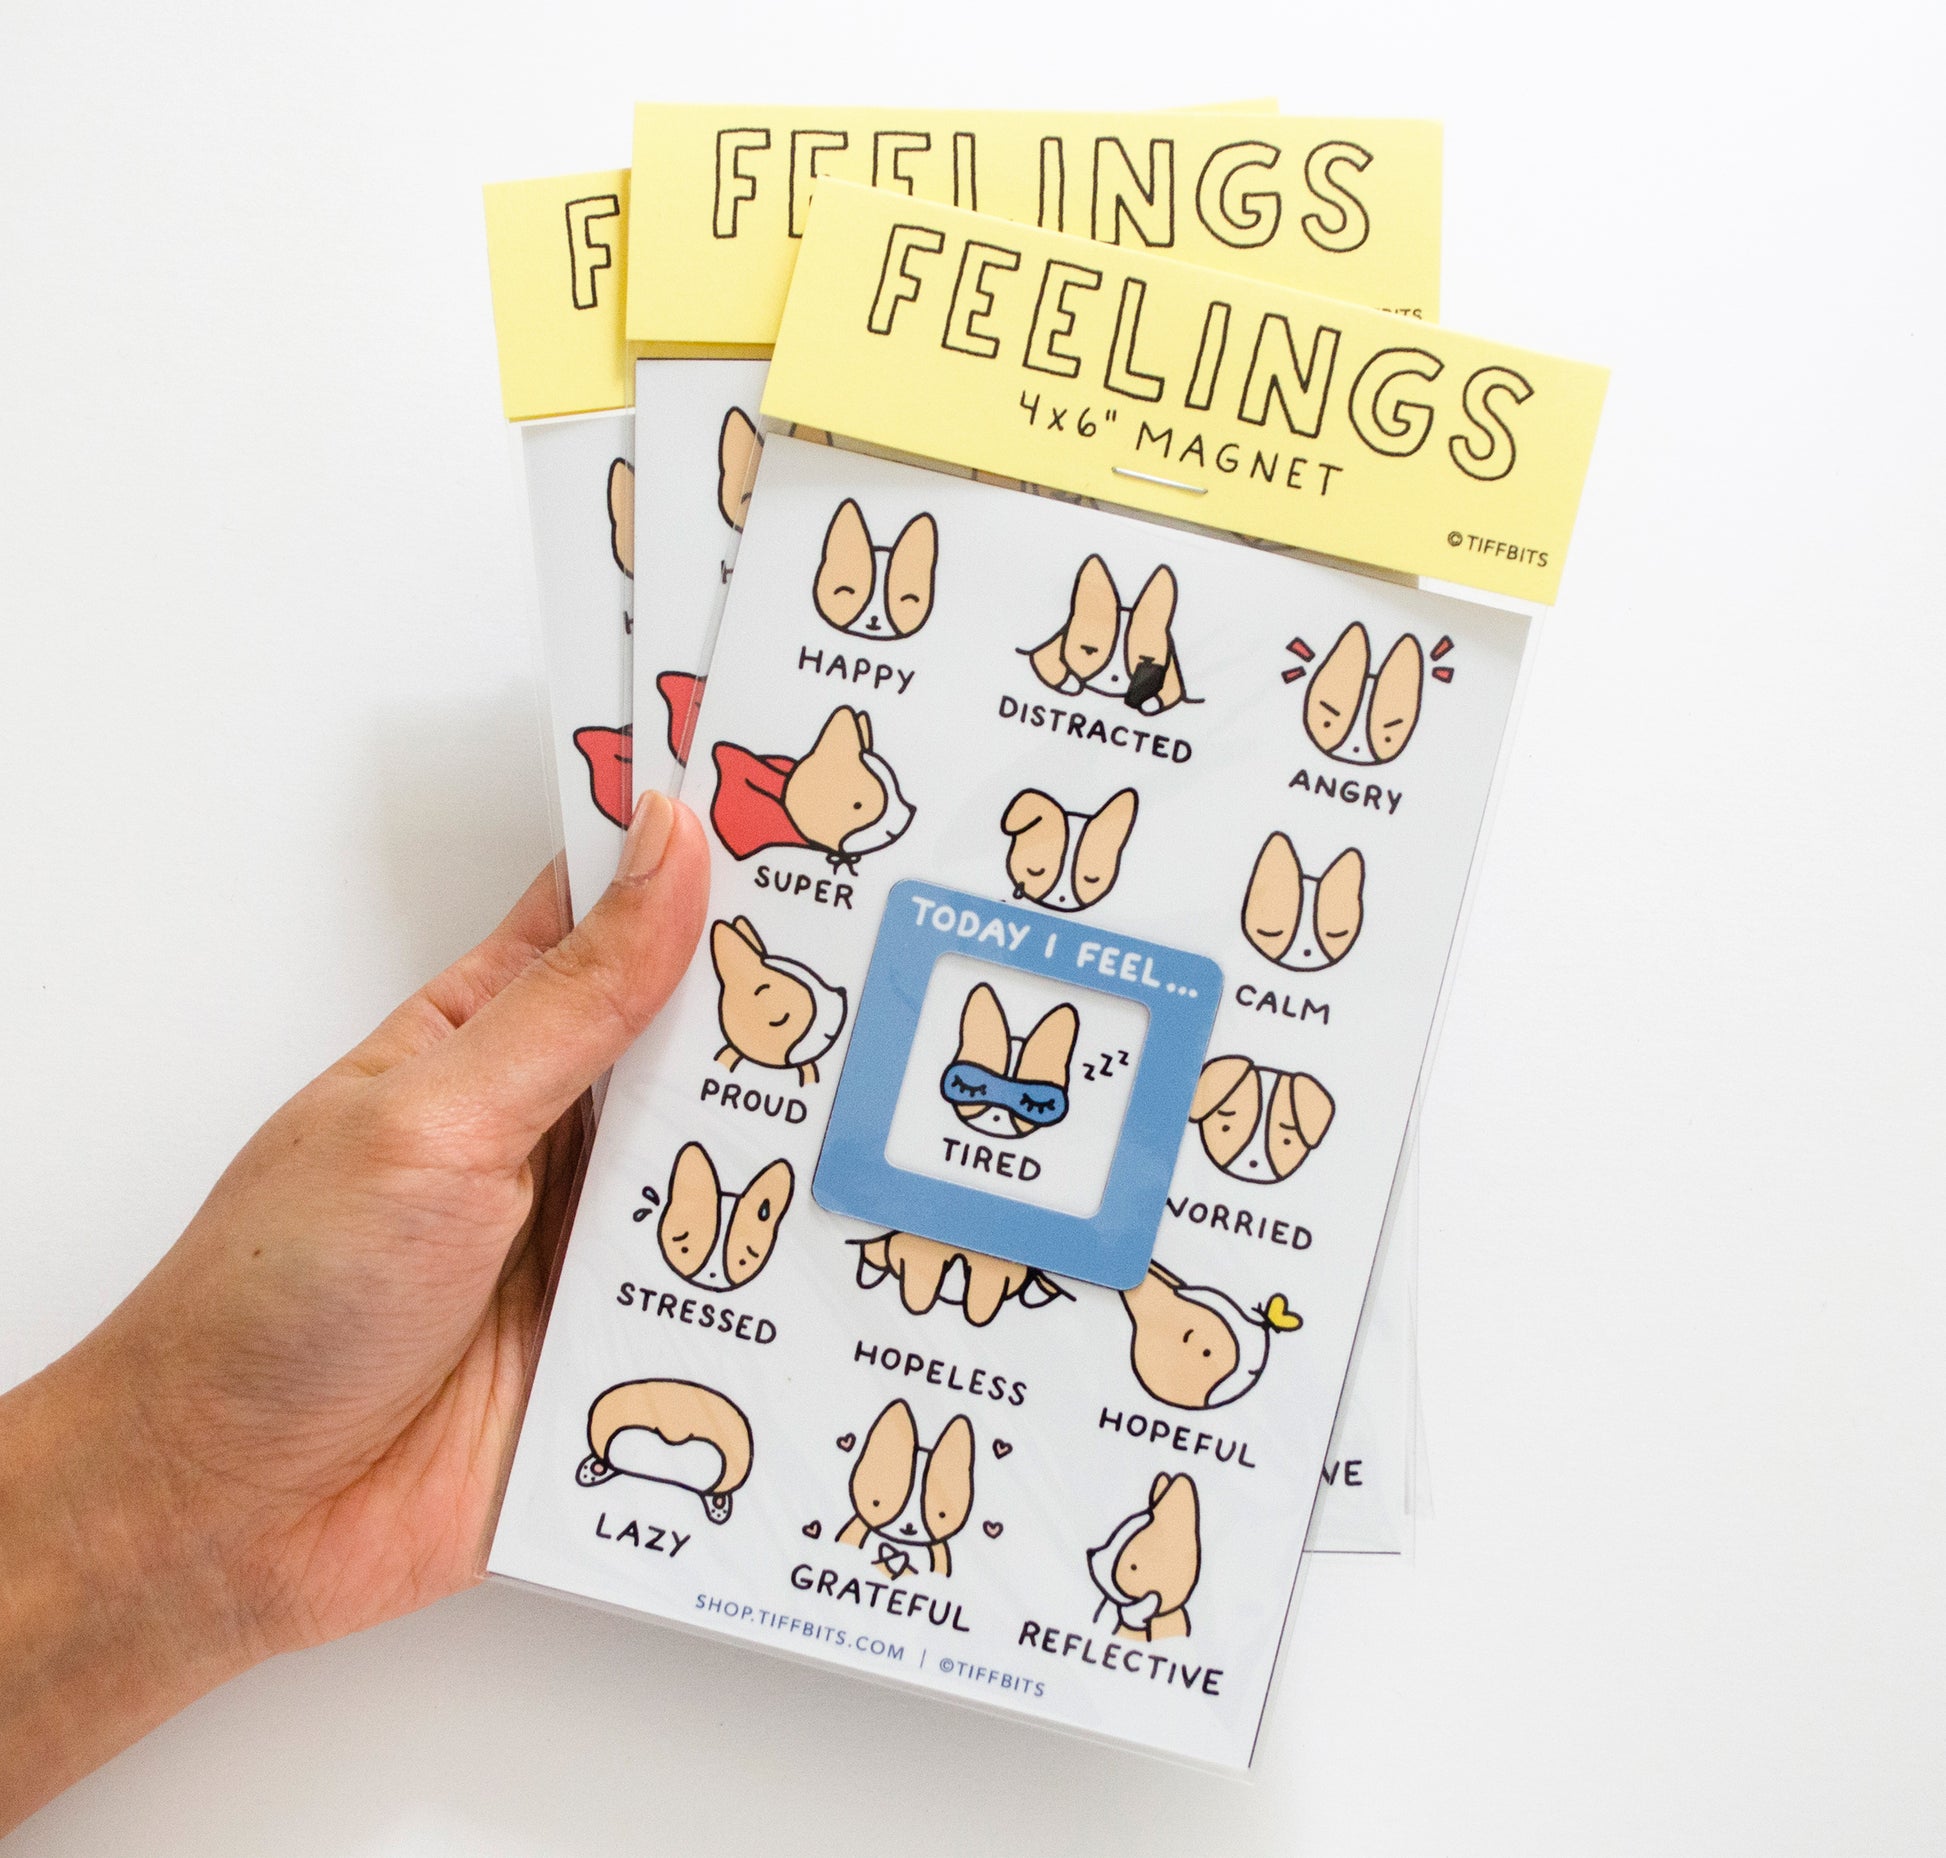 packaged photo of feelings magnet of a chart of feelings with cute corgi expressions ranging from happy to reflective to angry to calm